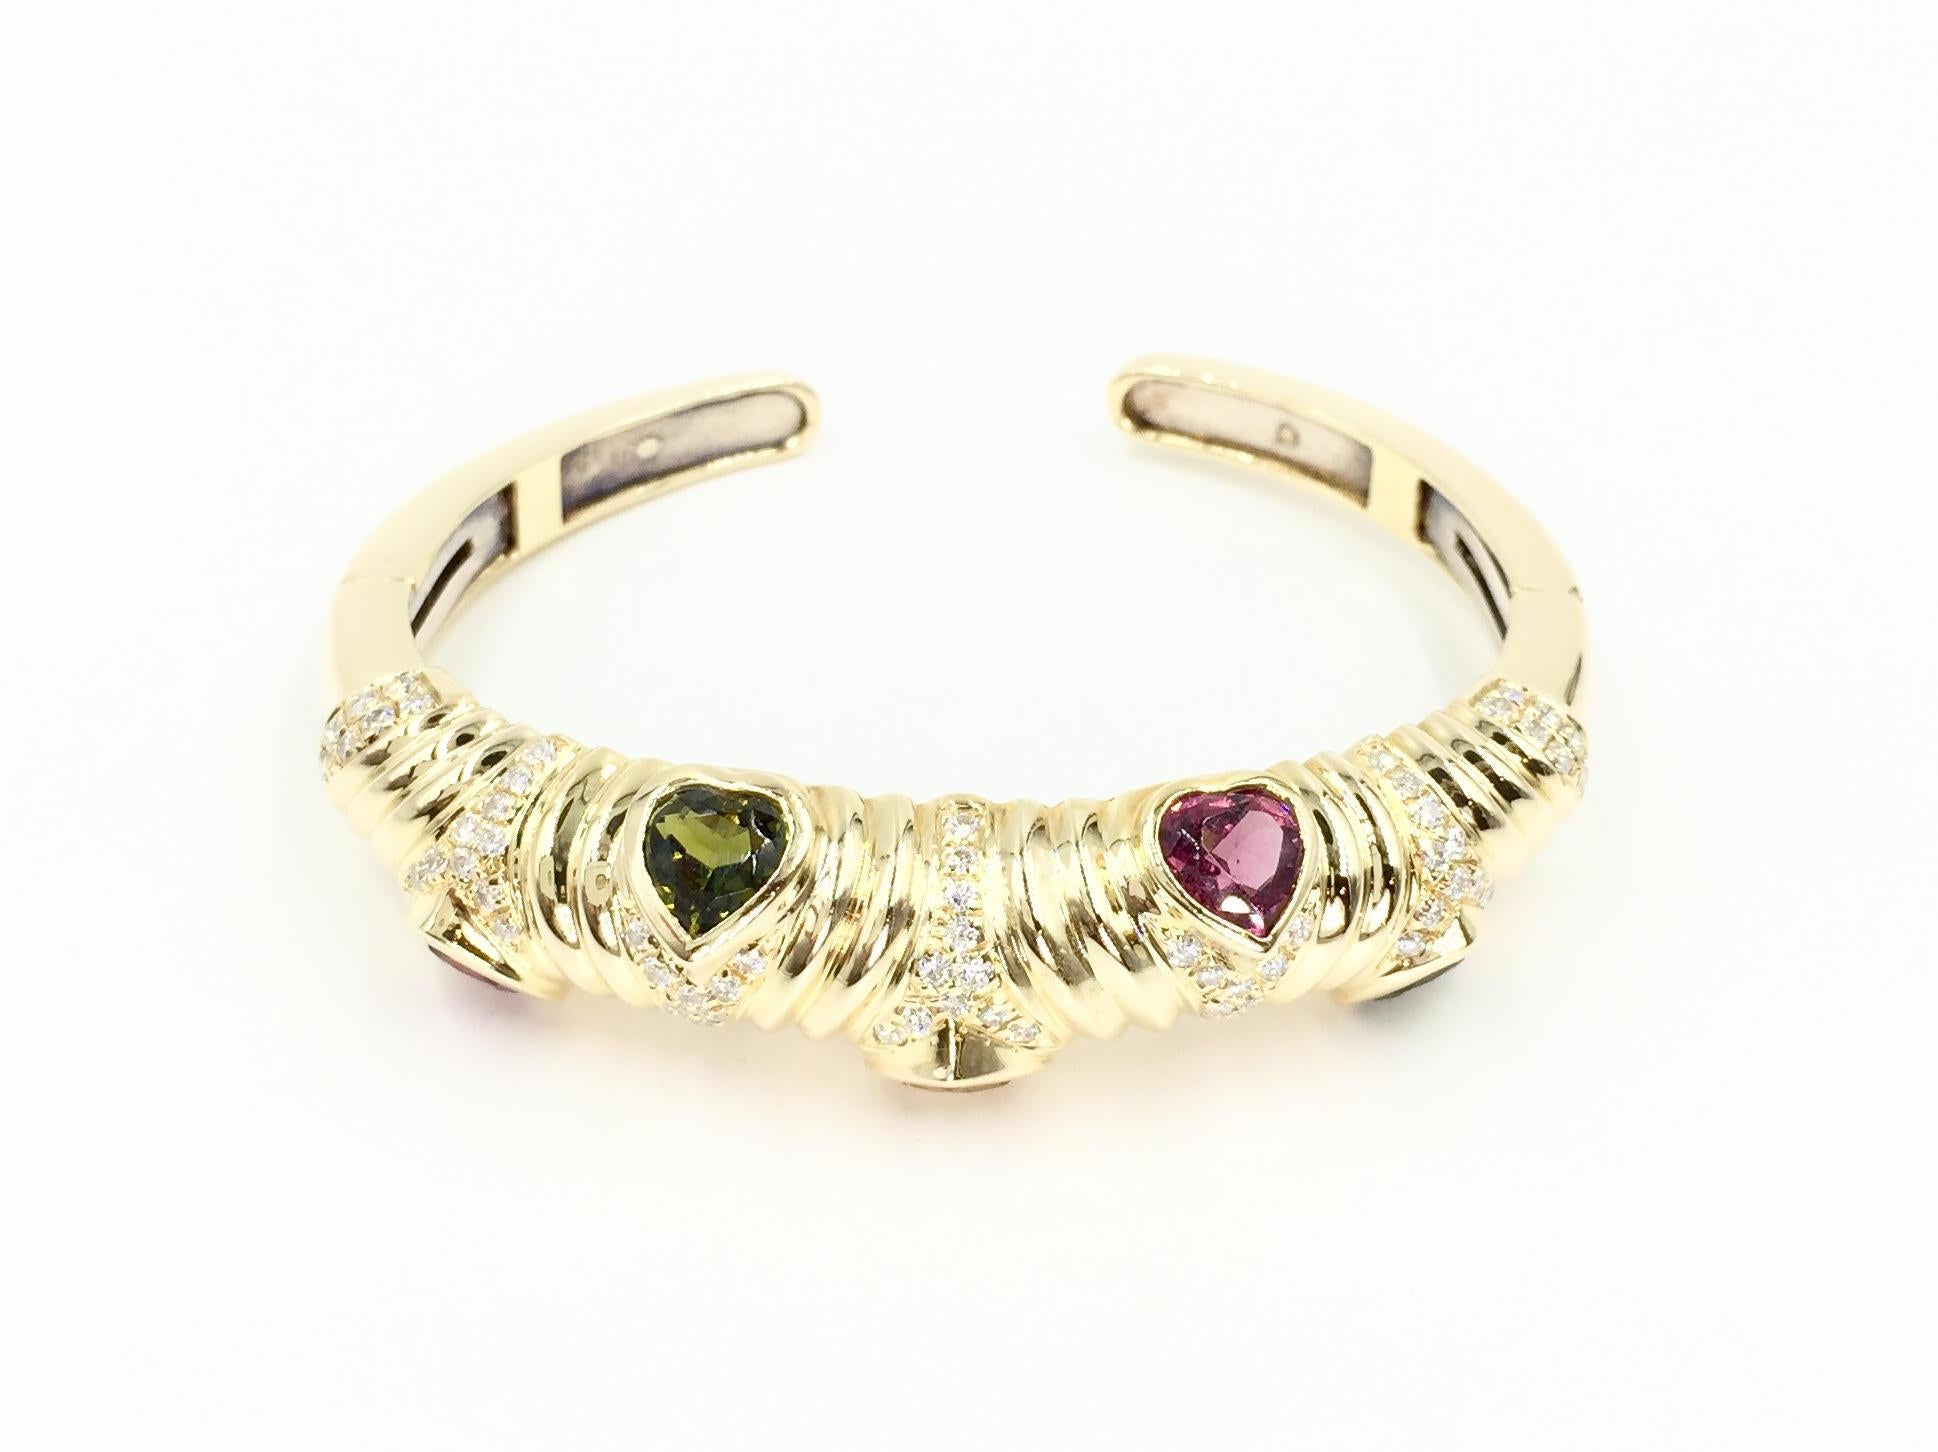 A solid and fashionable 18 karat yellow gold cuff bracelet featuring approximately 1.70 carats of round brilliant diamonds, approximately G color, VS2 clarity, and bezel set heart shape semi precious stones - two green tourmalines, two pink